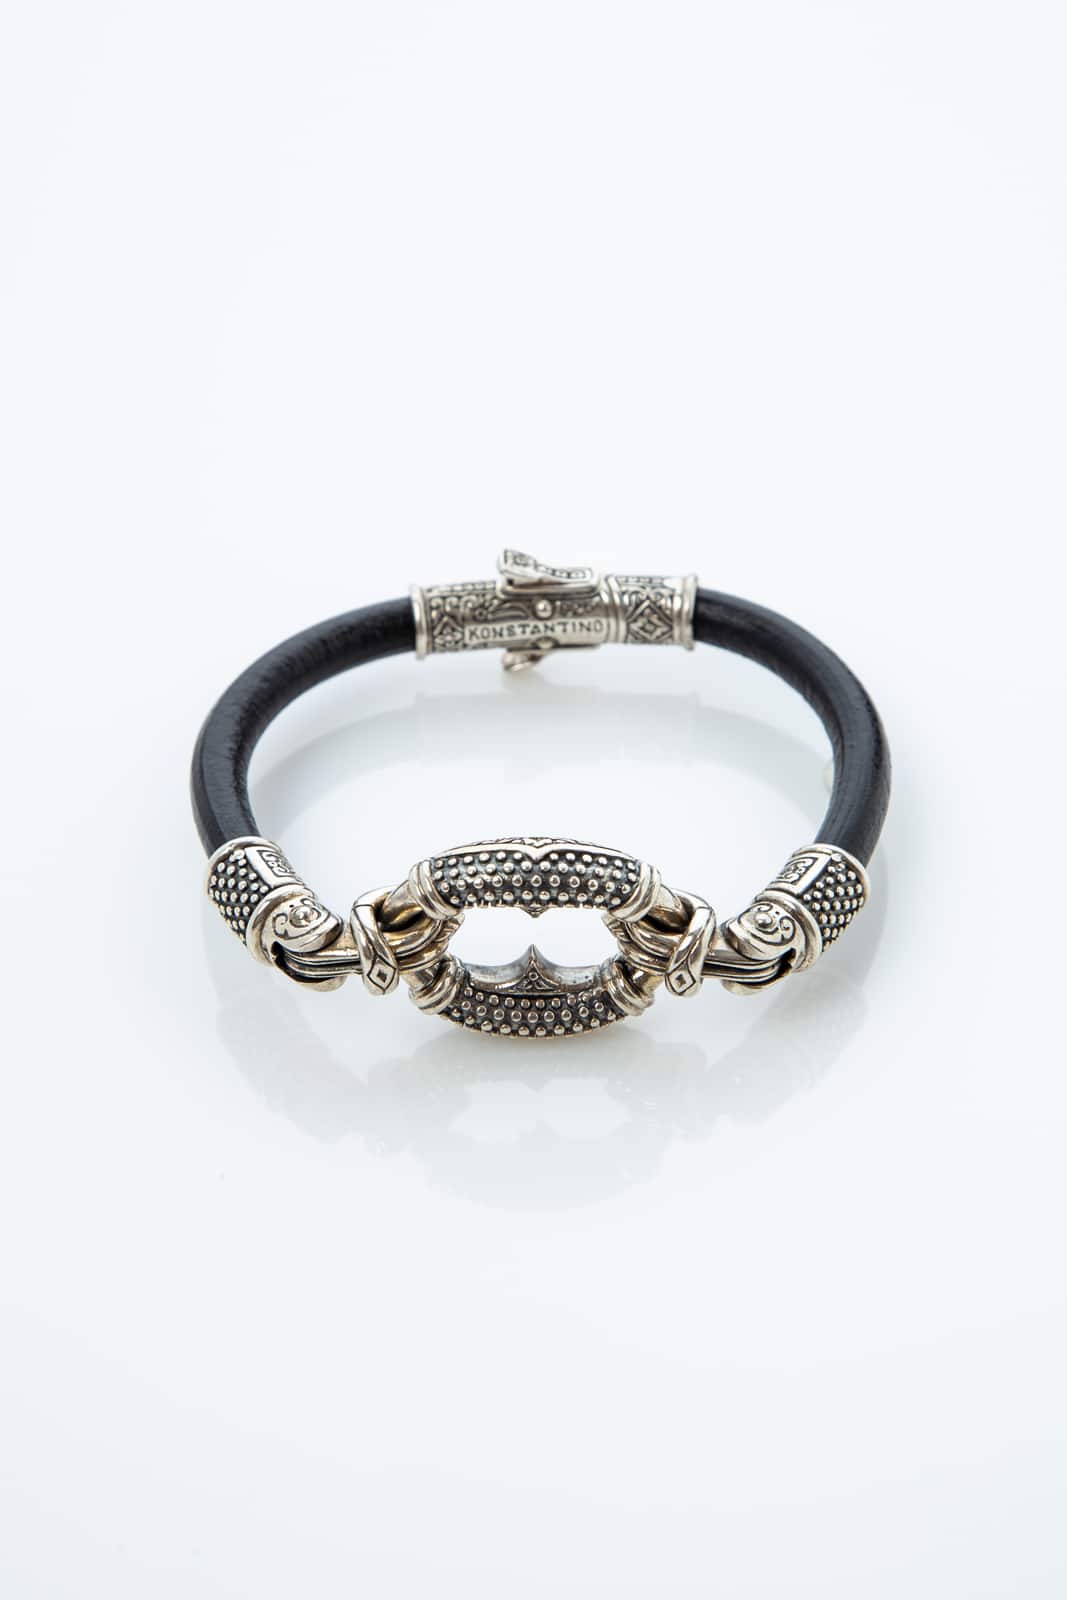 BRACELET IN STERLING SILVER AND LEATHER